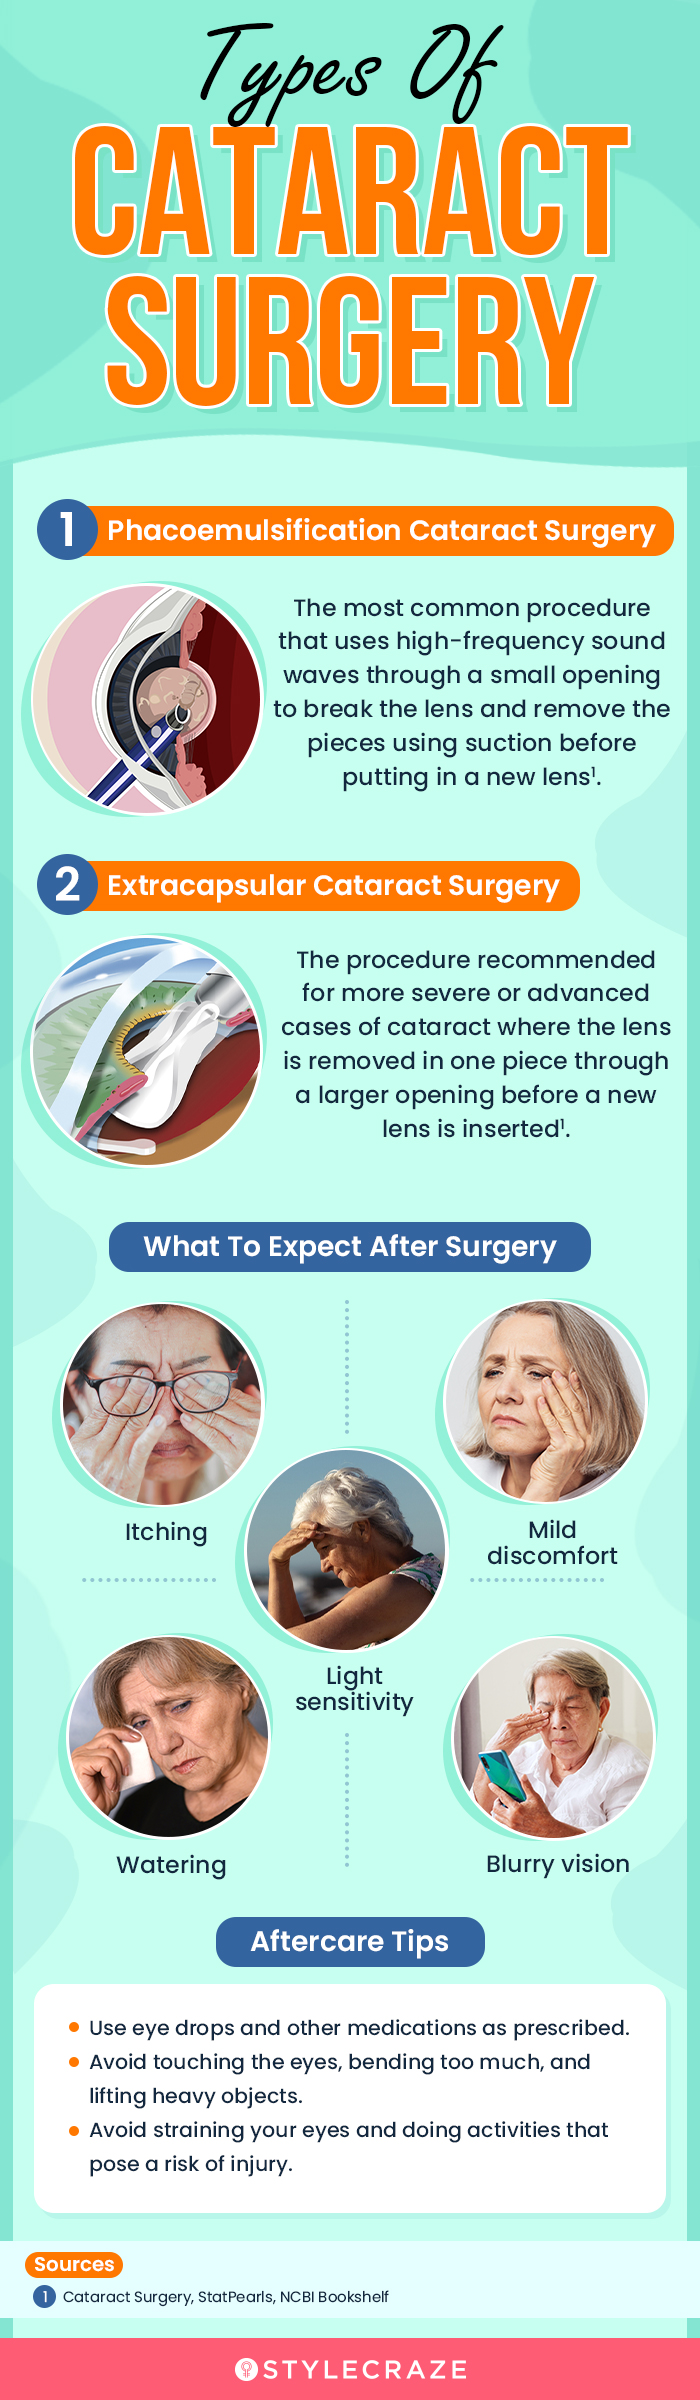 types of cataract surgery (infographic)